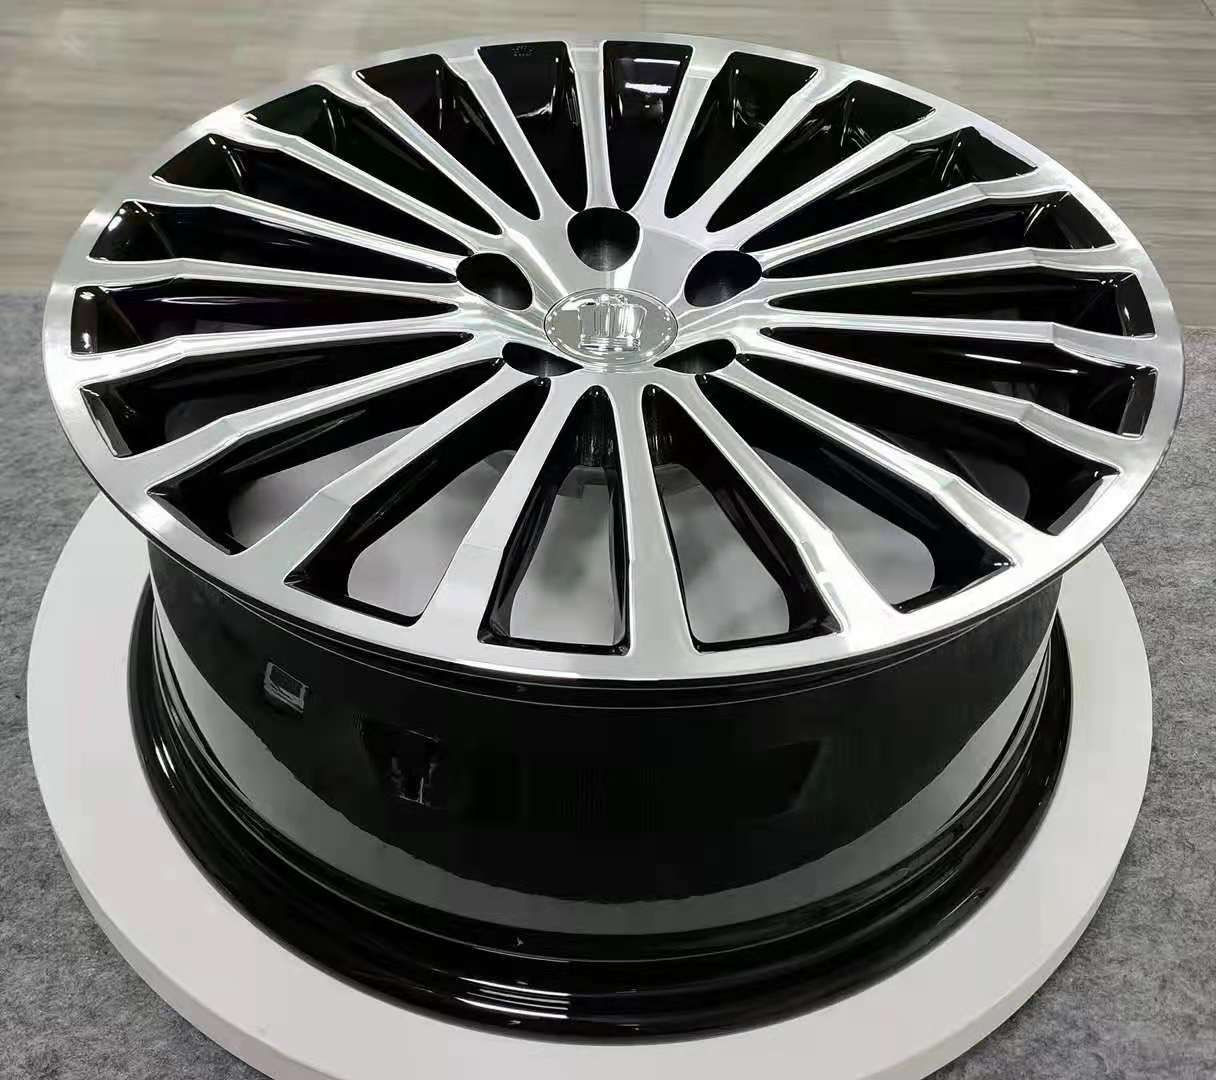 low pressure casting alloy wheel with 5 double spokes for European Car